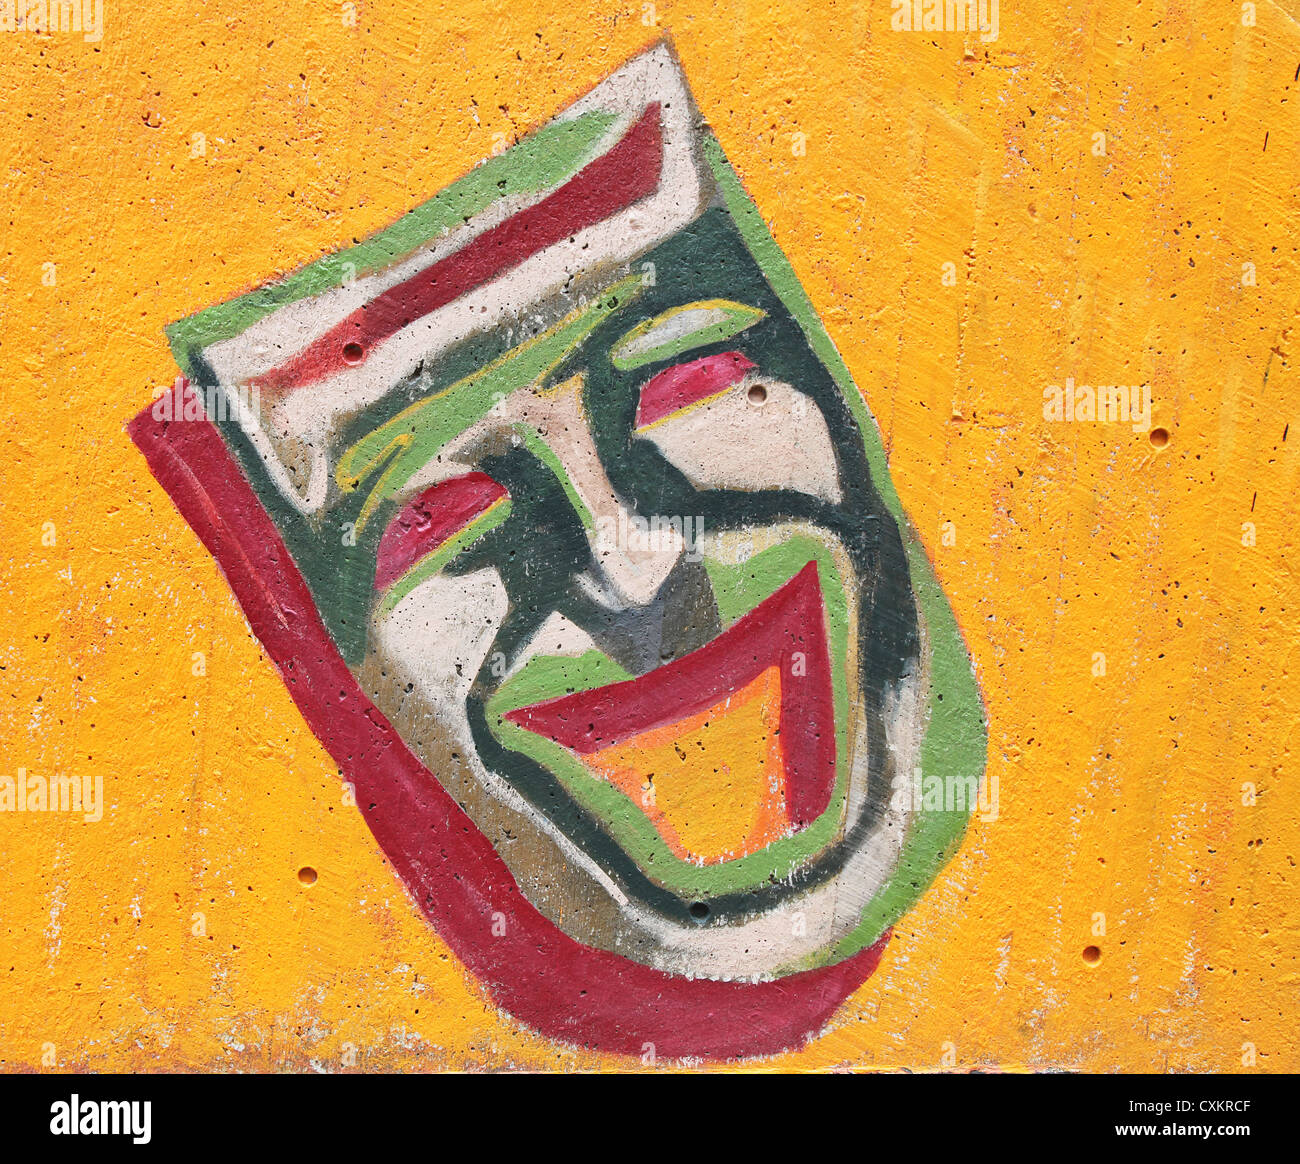 Graffiti of a theatrical mask representing comedy painted on a cement wall. Stock Photo